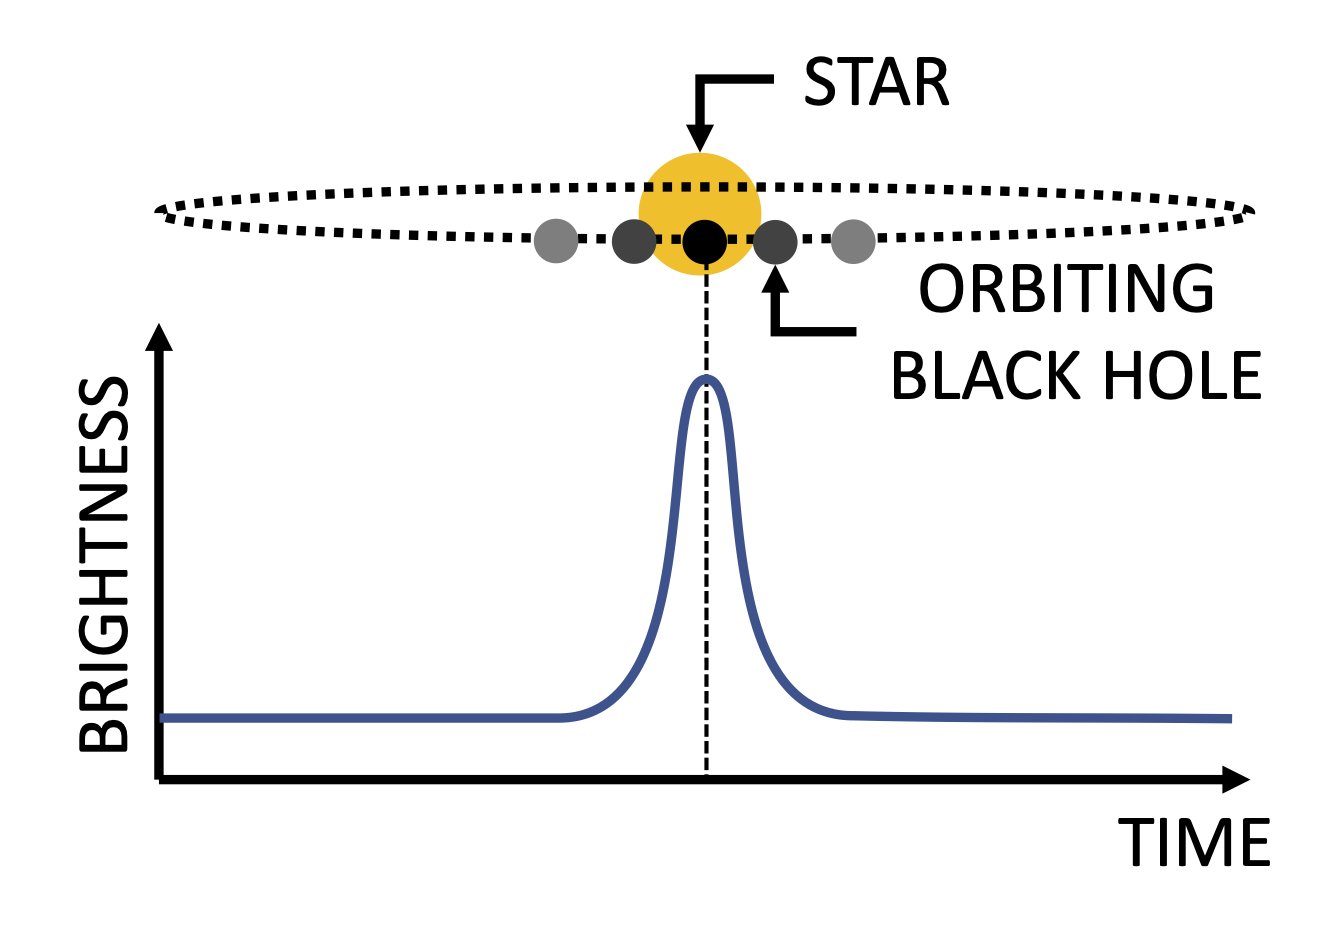 The light from a star is magnified when the black hole passes in front of it. This creates a distinctive peak in the lightcur